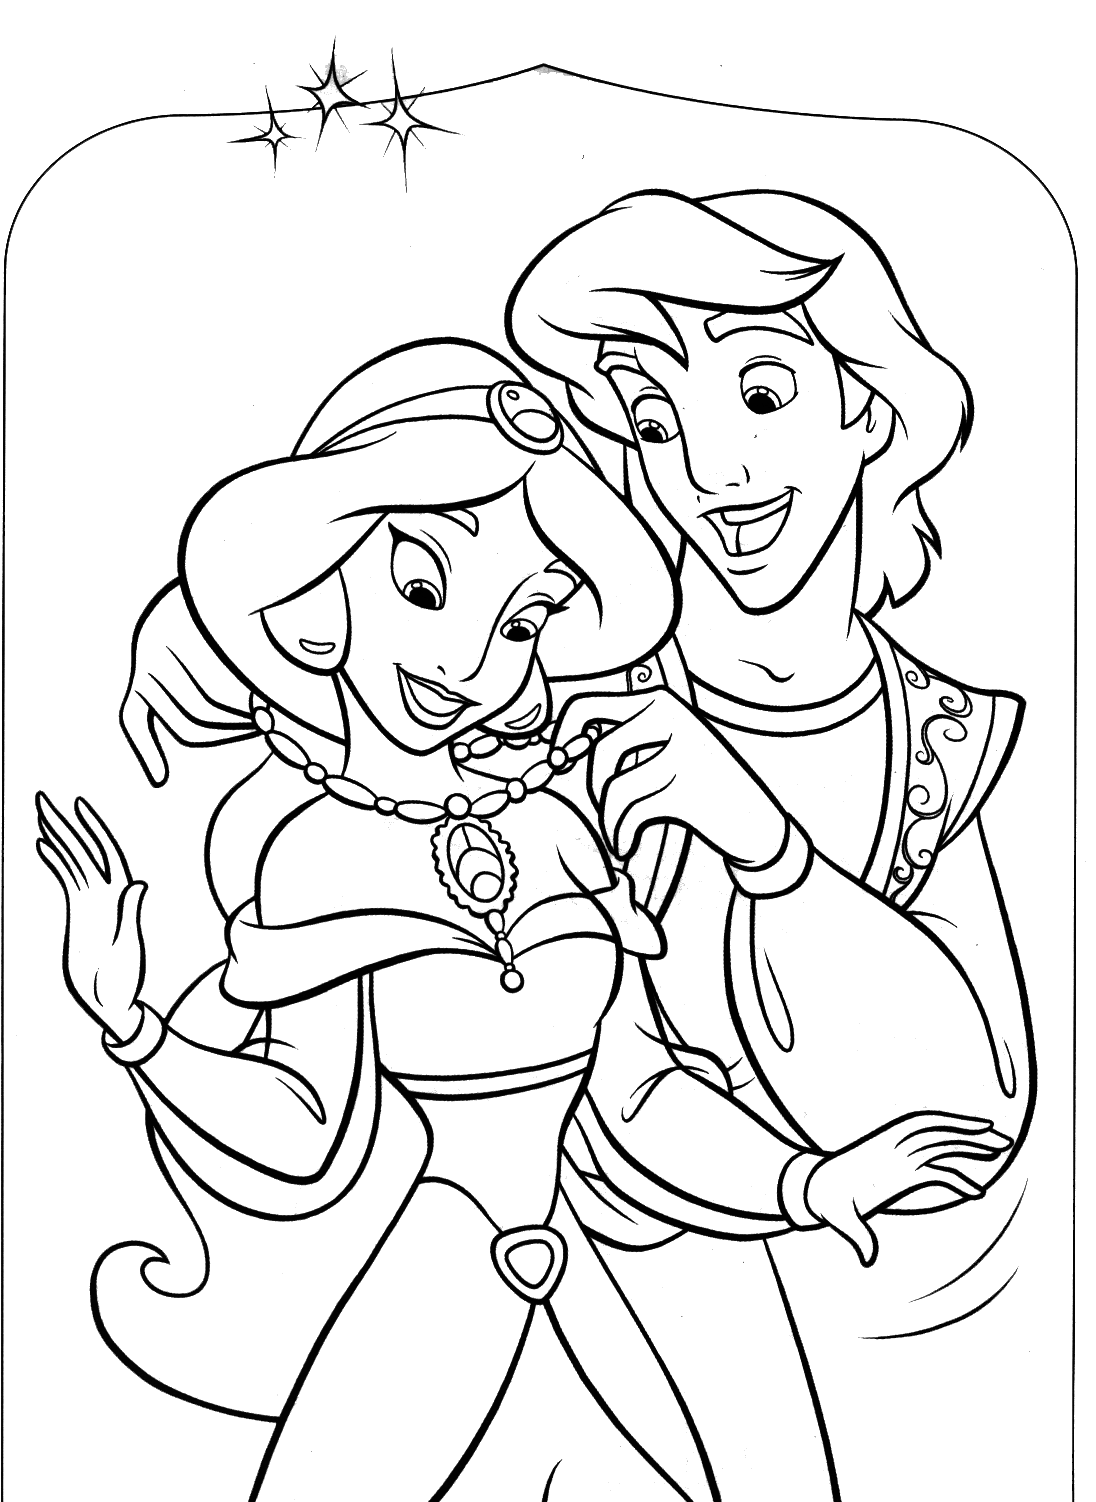 Aladdin #83 (Animation Movies) – Printable coloring pages